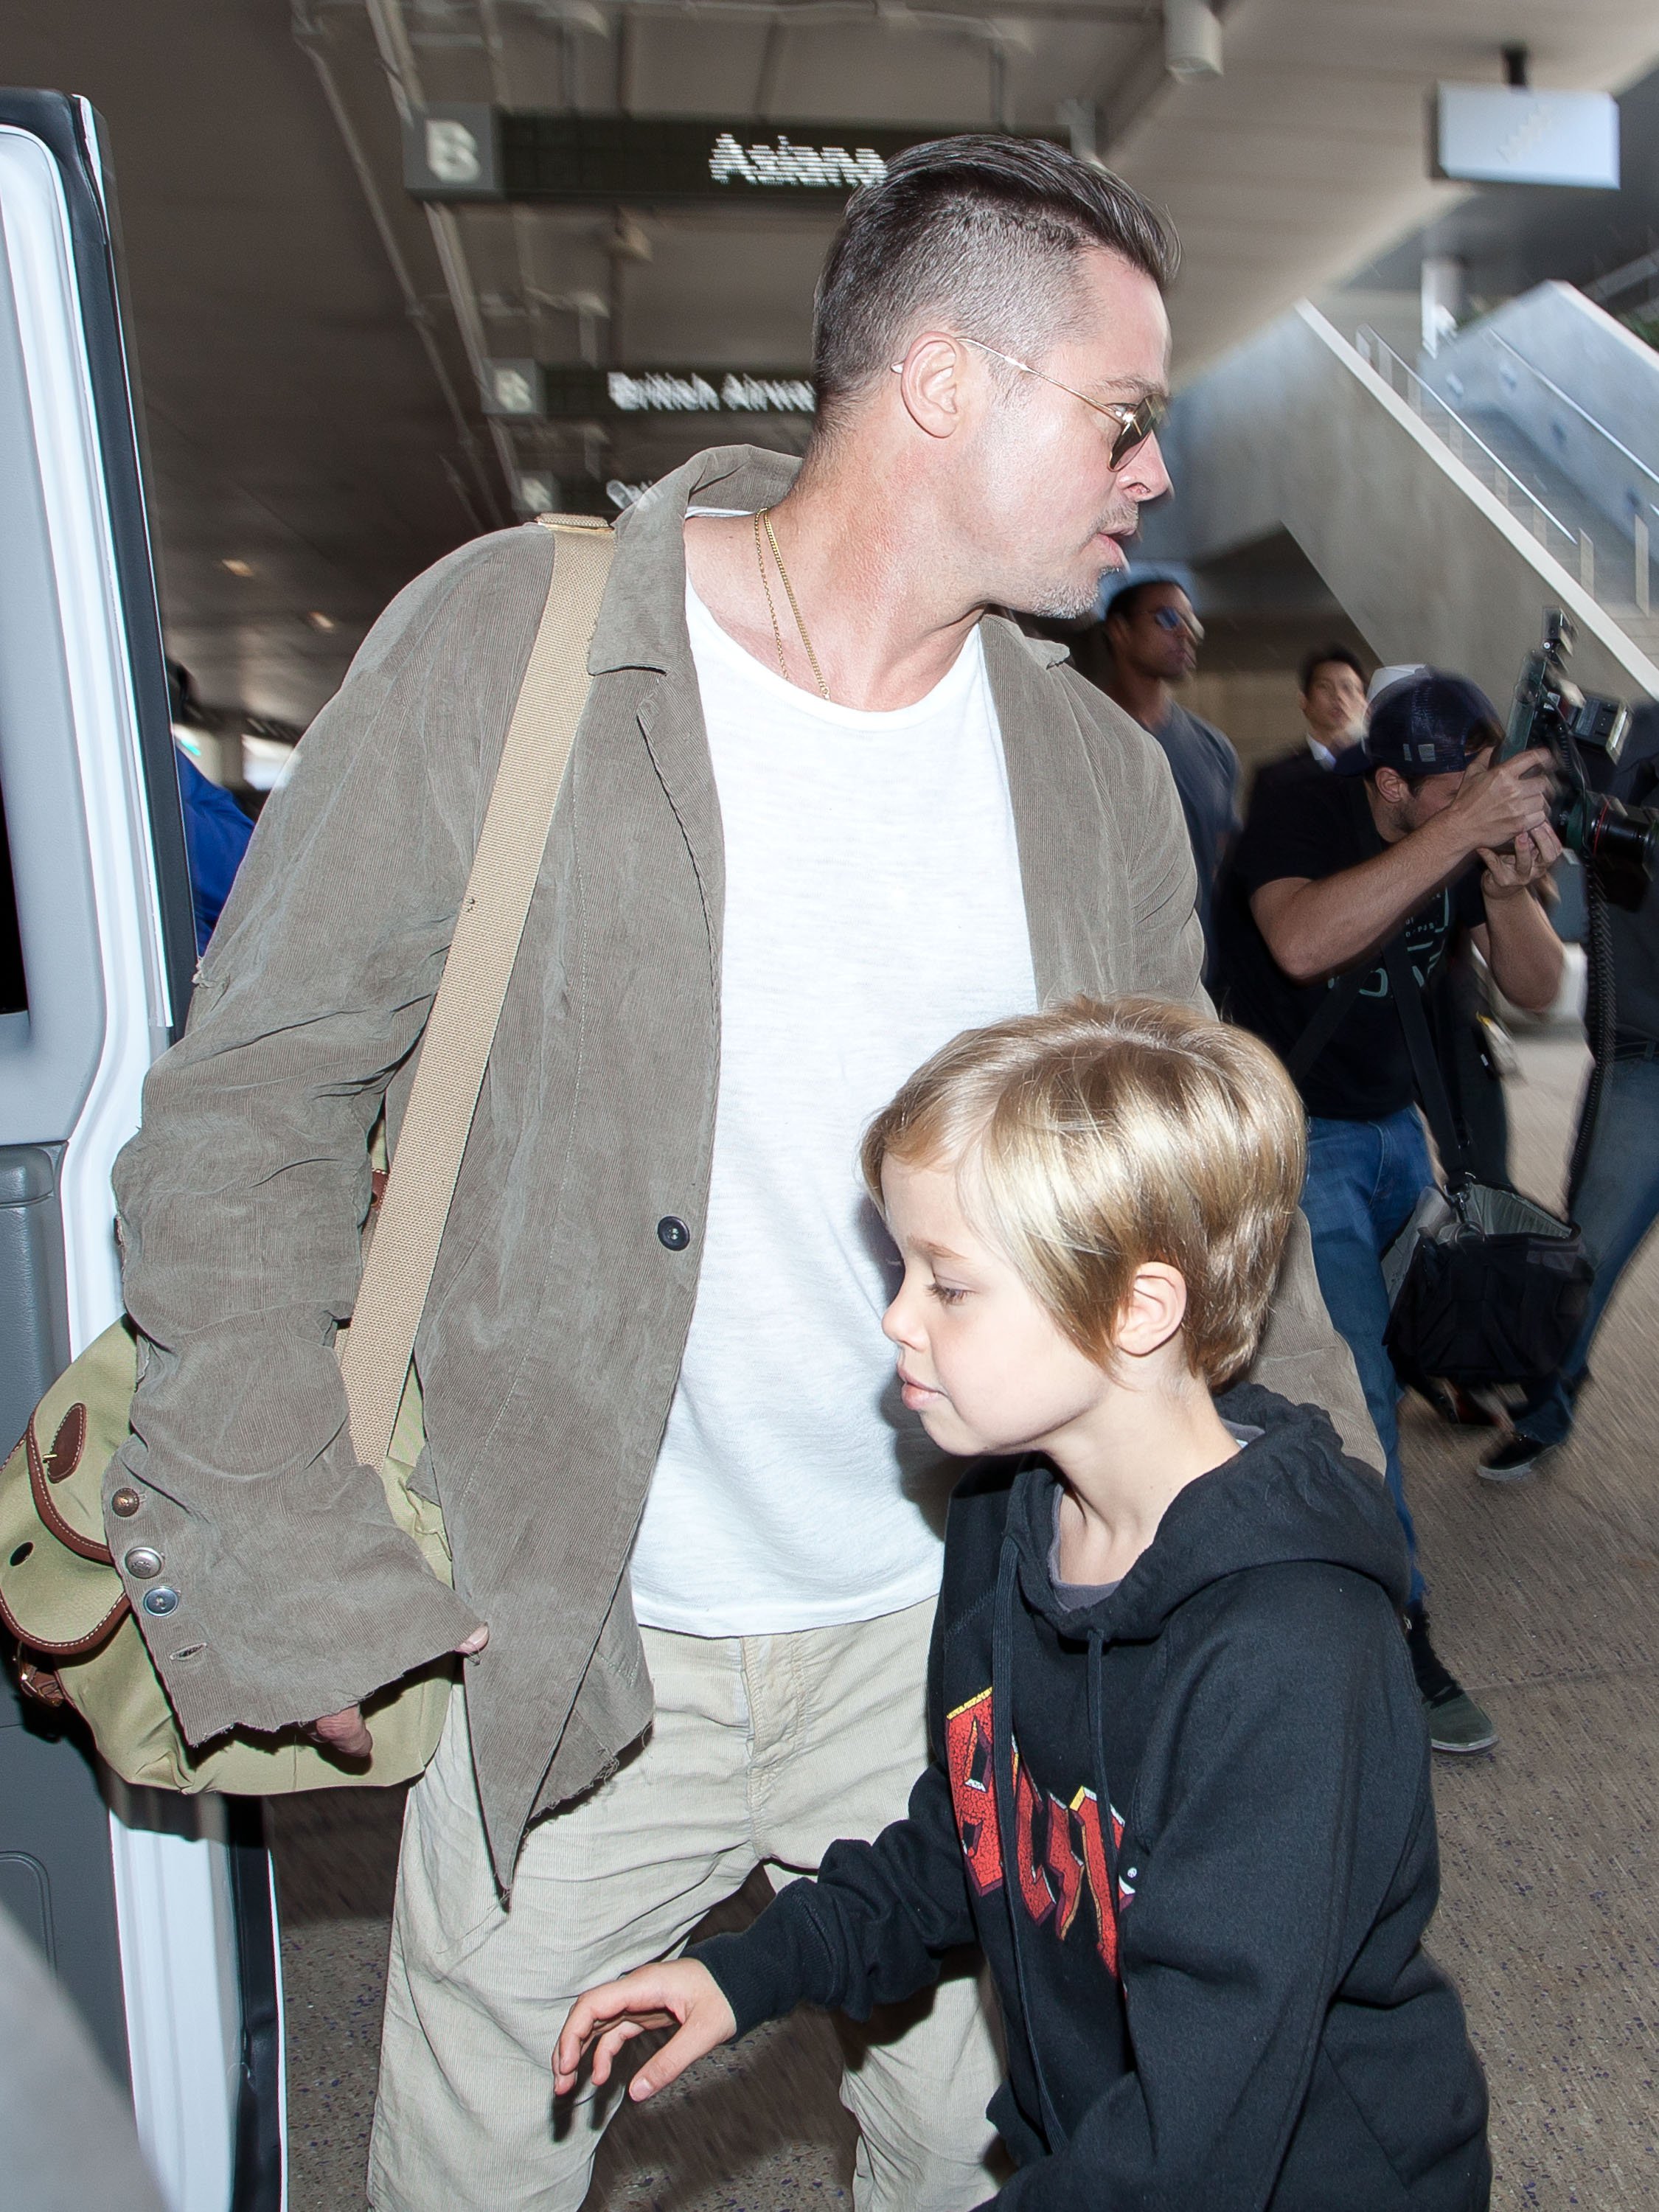 Brad Pitt and Shiloh Jolie-Pitt at the Los Angeles International Airport on February 5, 2014, in Los Angeles, California. | Source: Getty Images